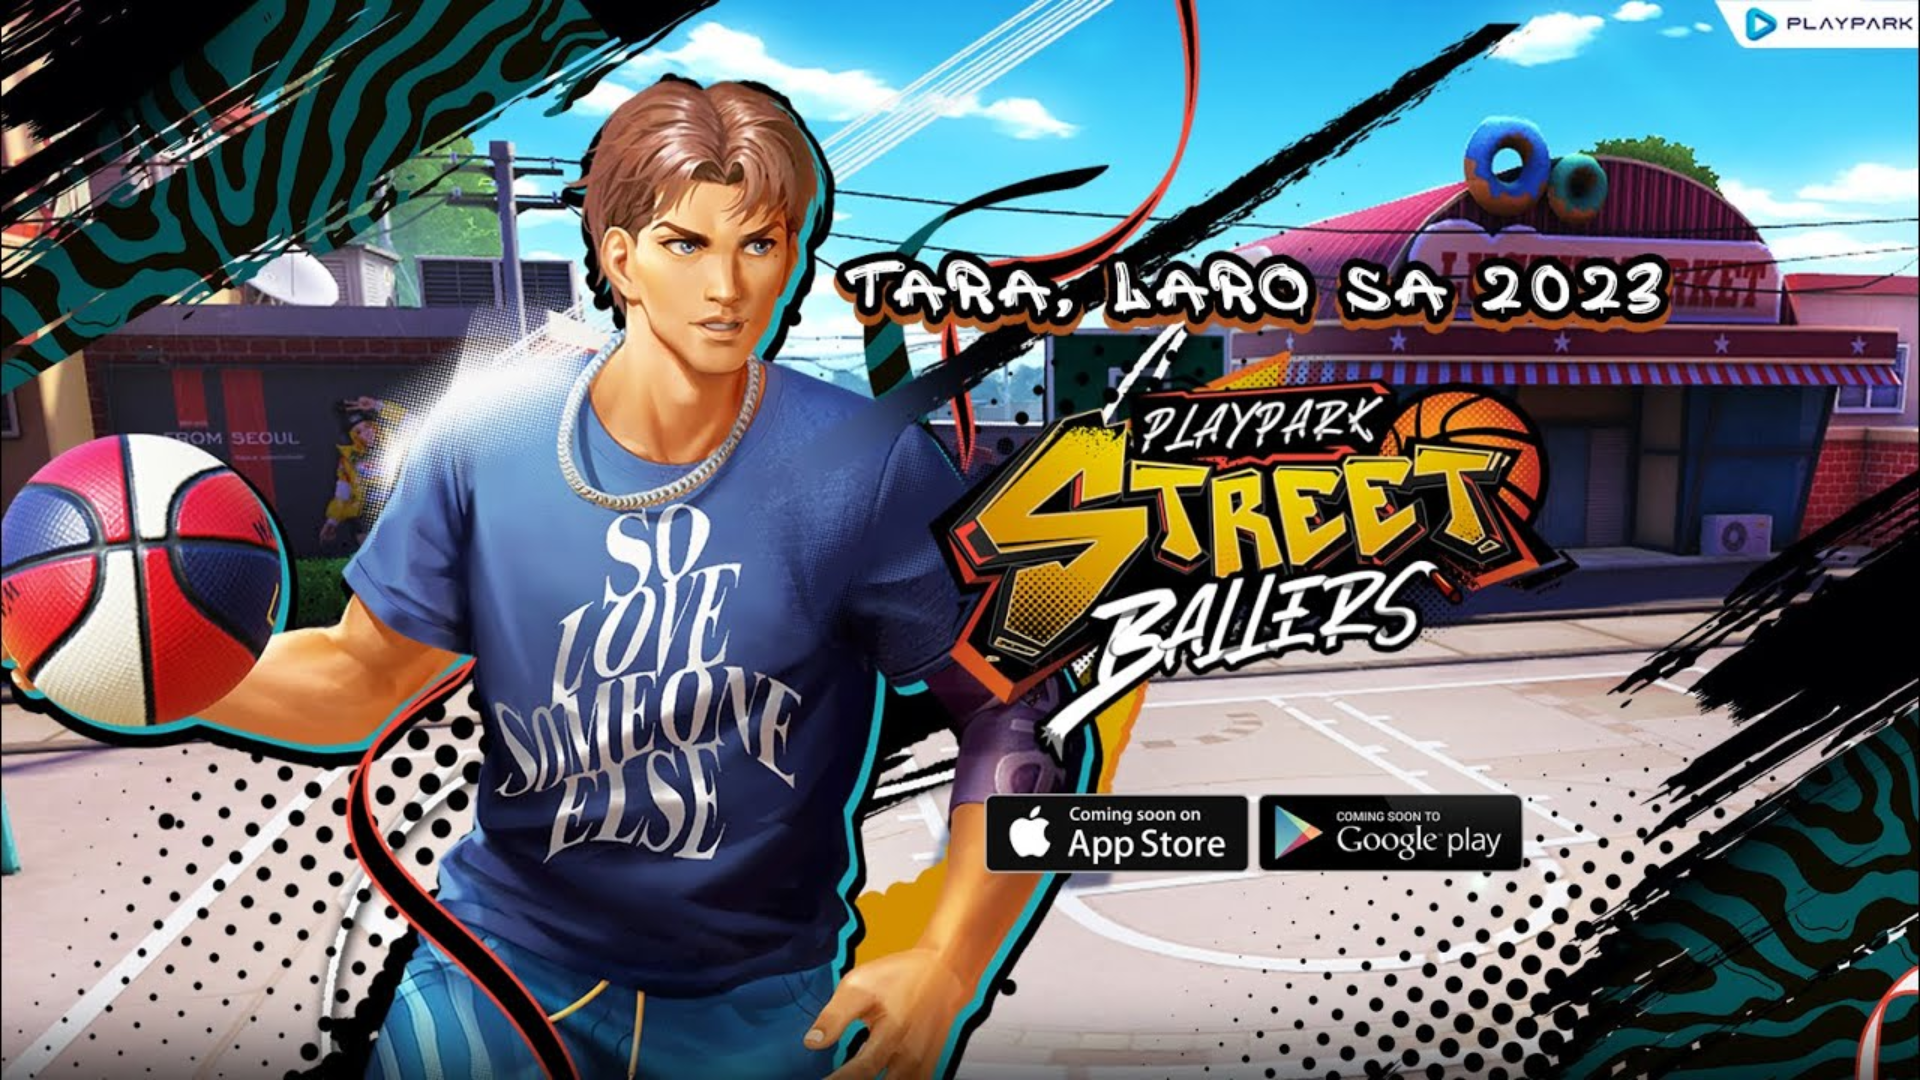 Banner of Parco giochi StreetBallers 1.123.1